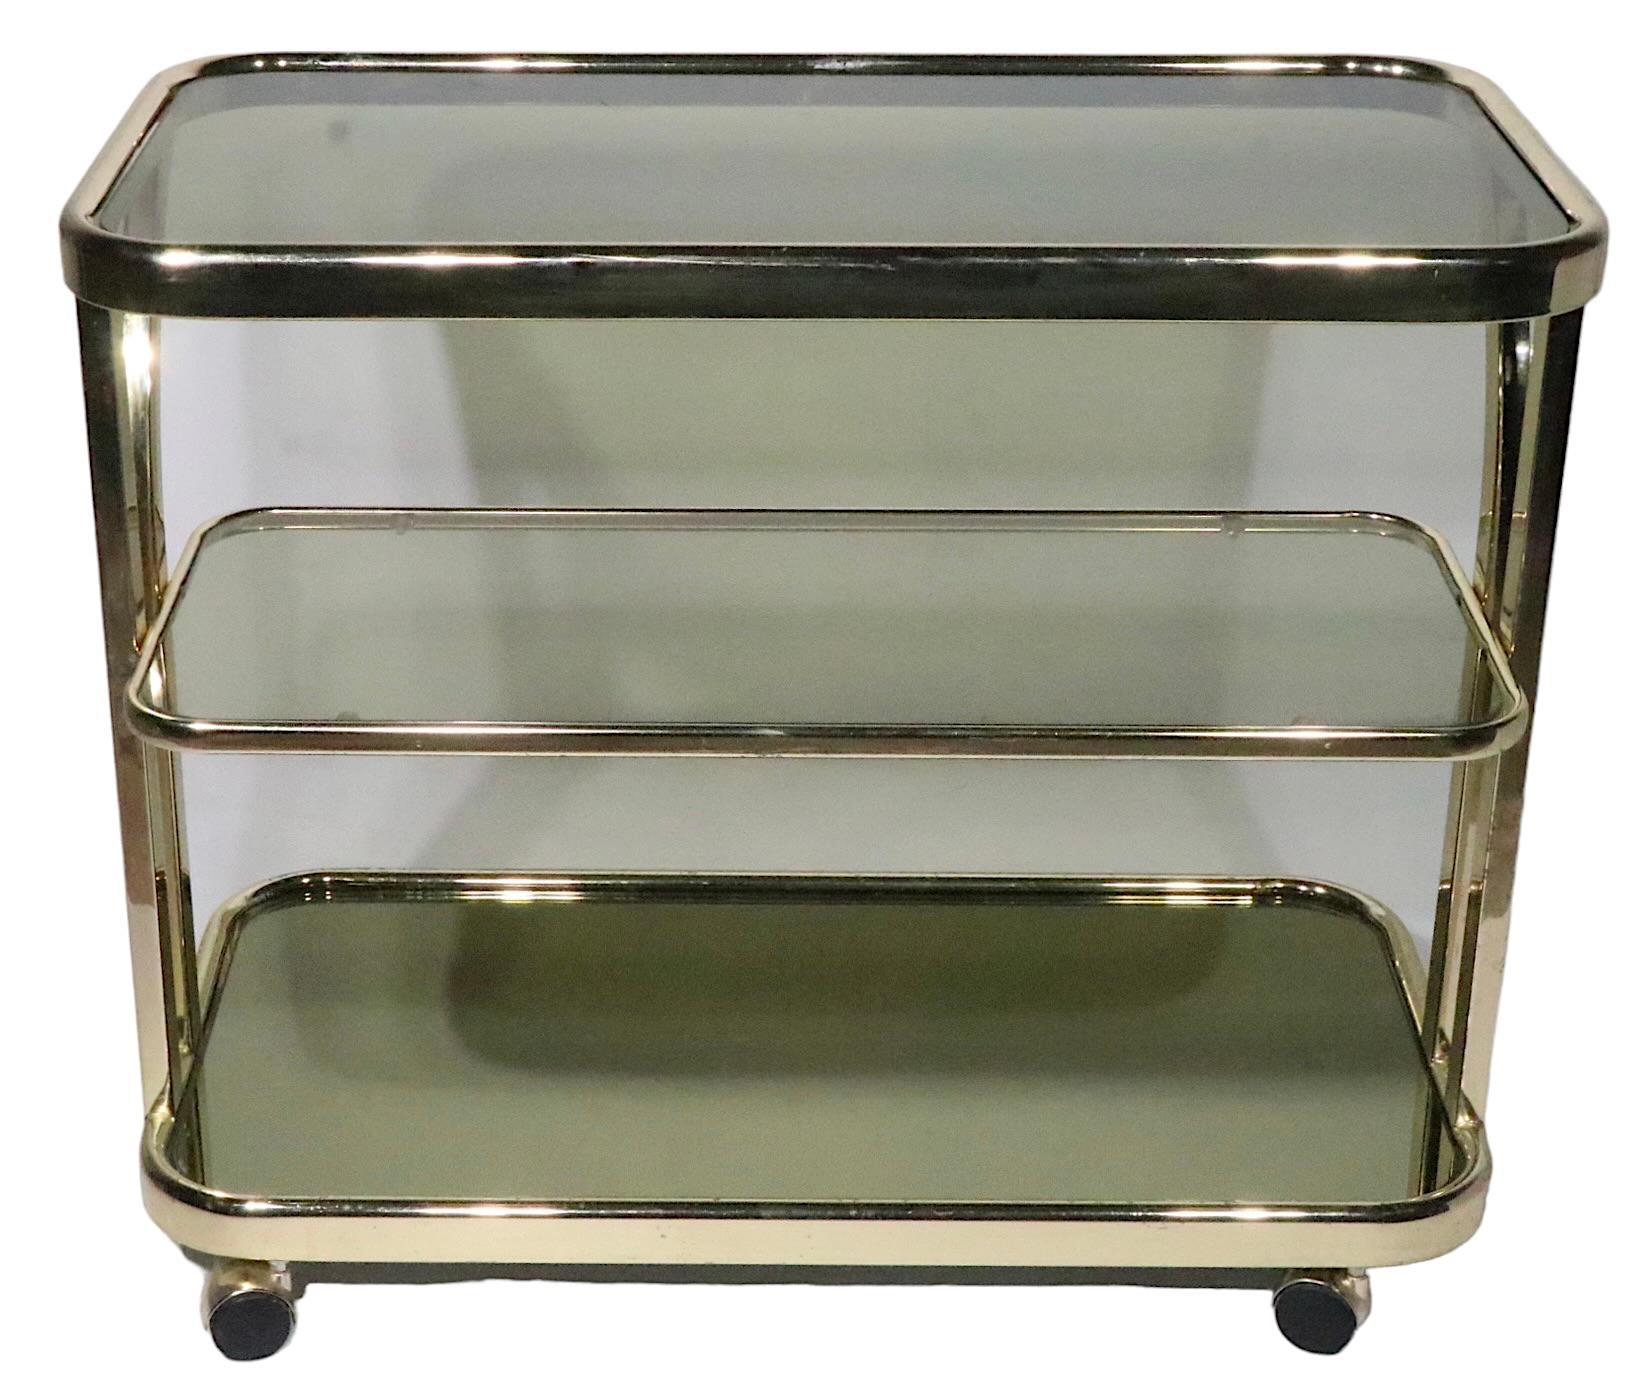 Post Modern Art Deco Revival Hollywood Revival Dry Bar Cart circa 1970/1980s In Good Condition For Sale In New York, NY